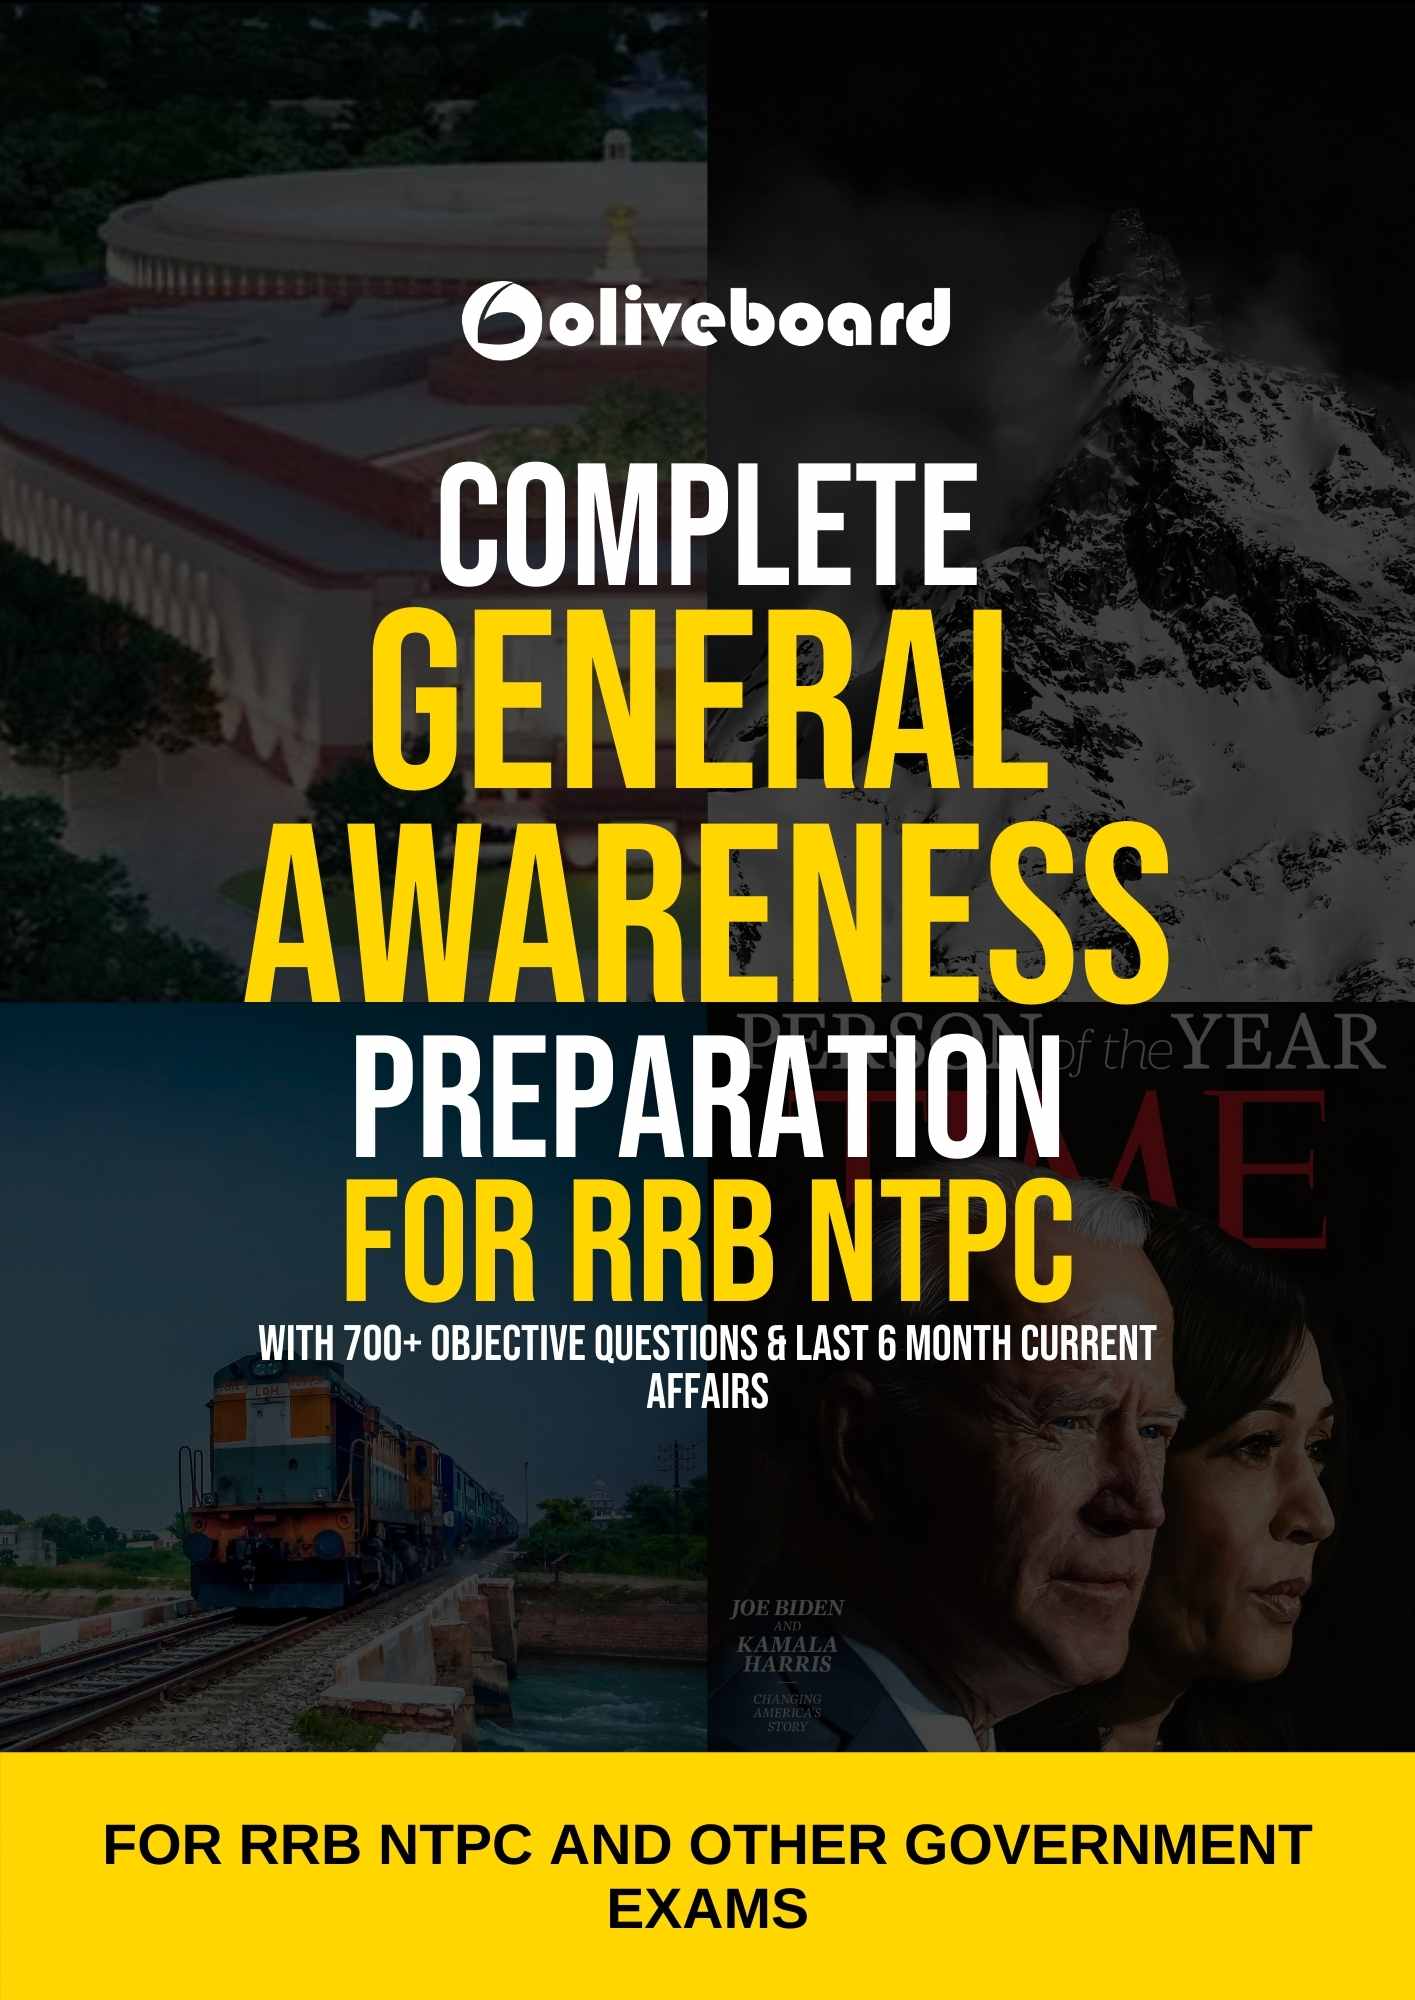 rrb-ntpc-general-awareness-preparation-strategy